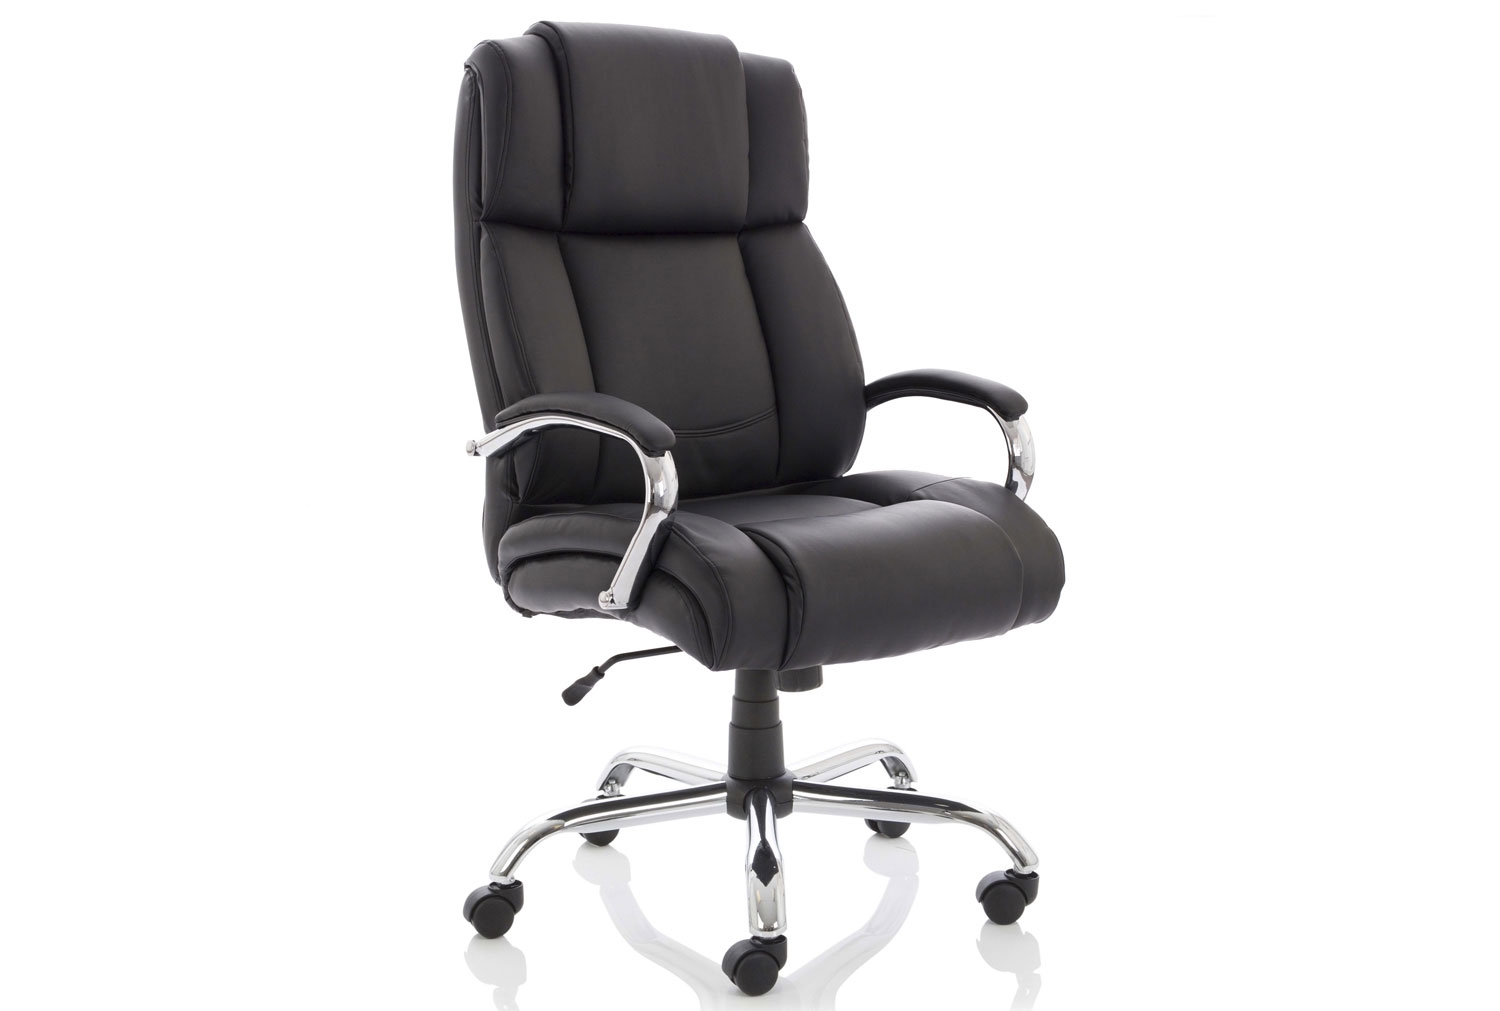 Levira Heavy Duty Bonded Leather Executive Office Chair, Fully Installed